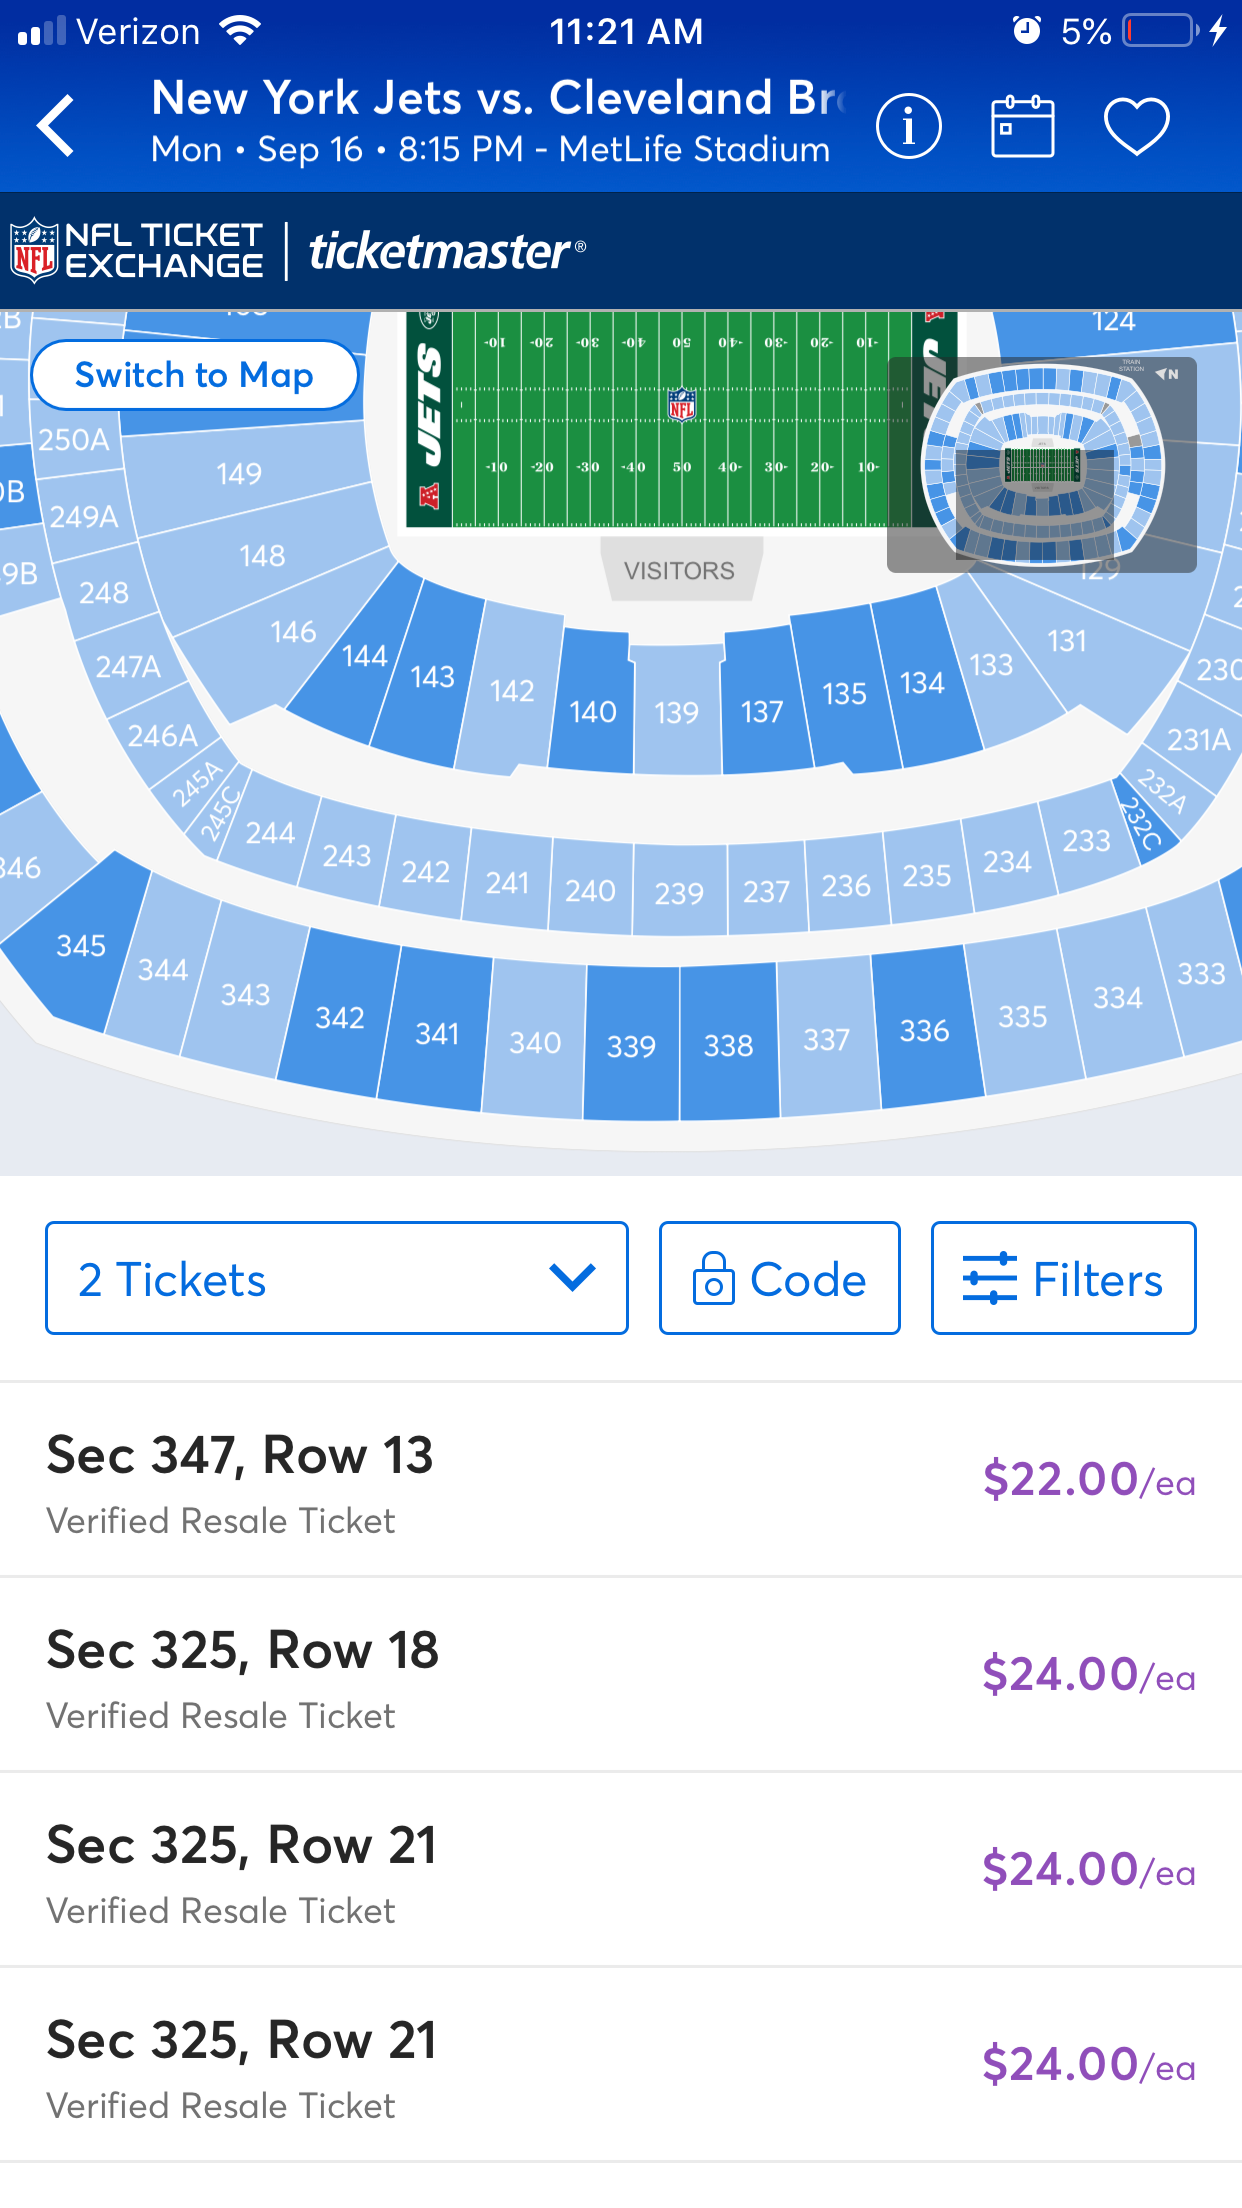 Browns at Jets tickets PLUMMETING